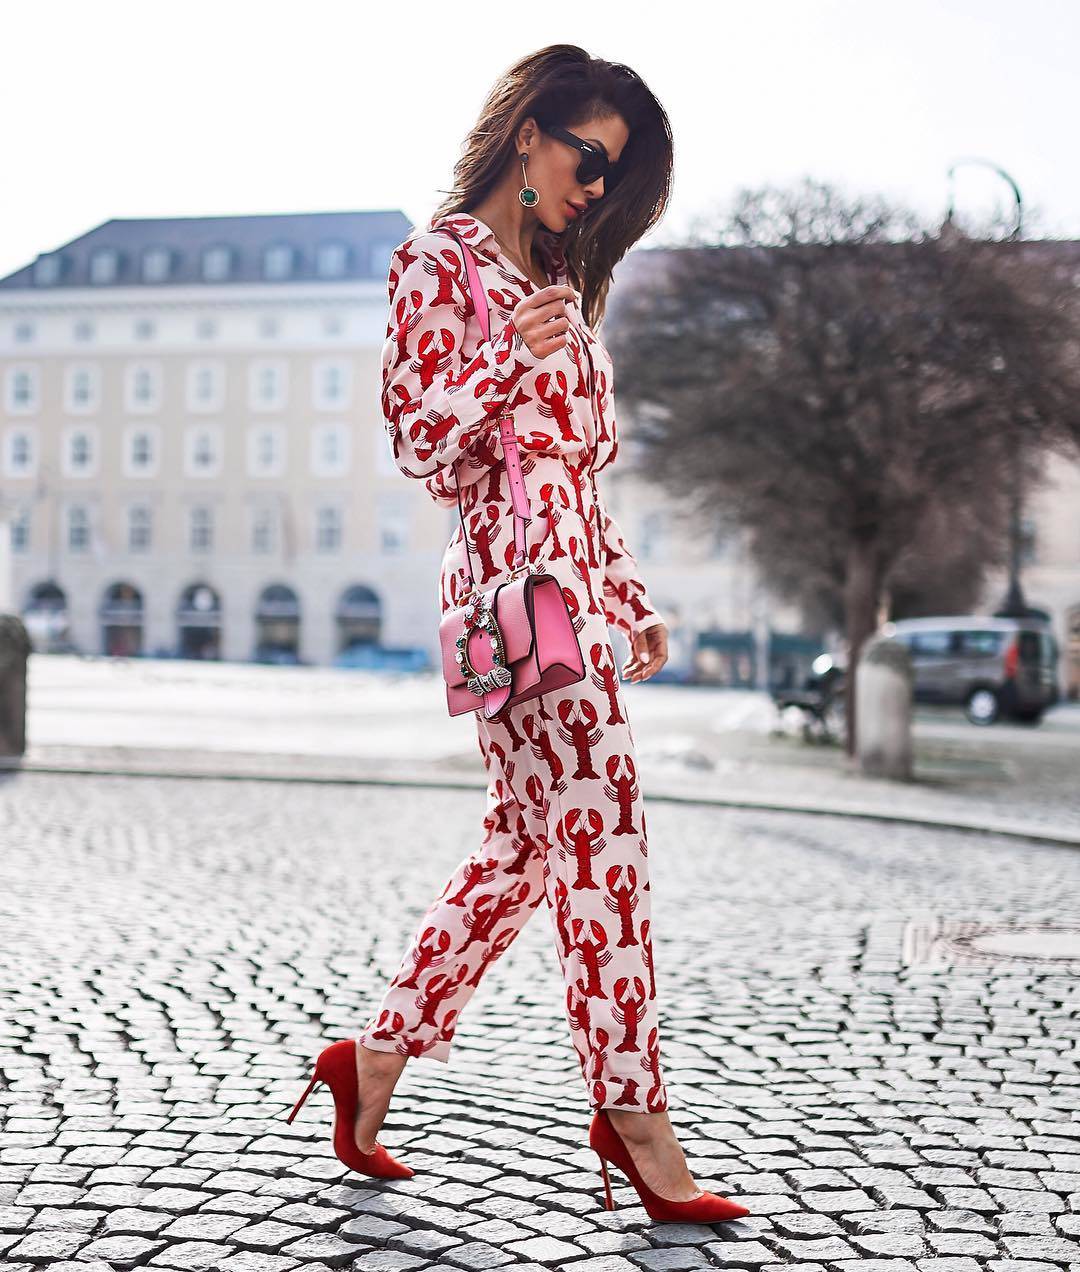 Printed Pants Outfits-50 Ideas on How To Wear Printed Pants